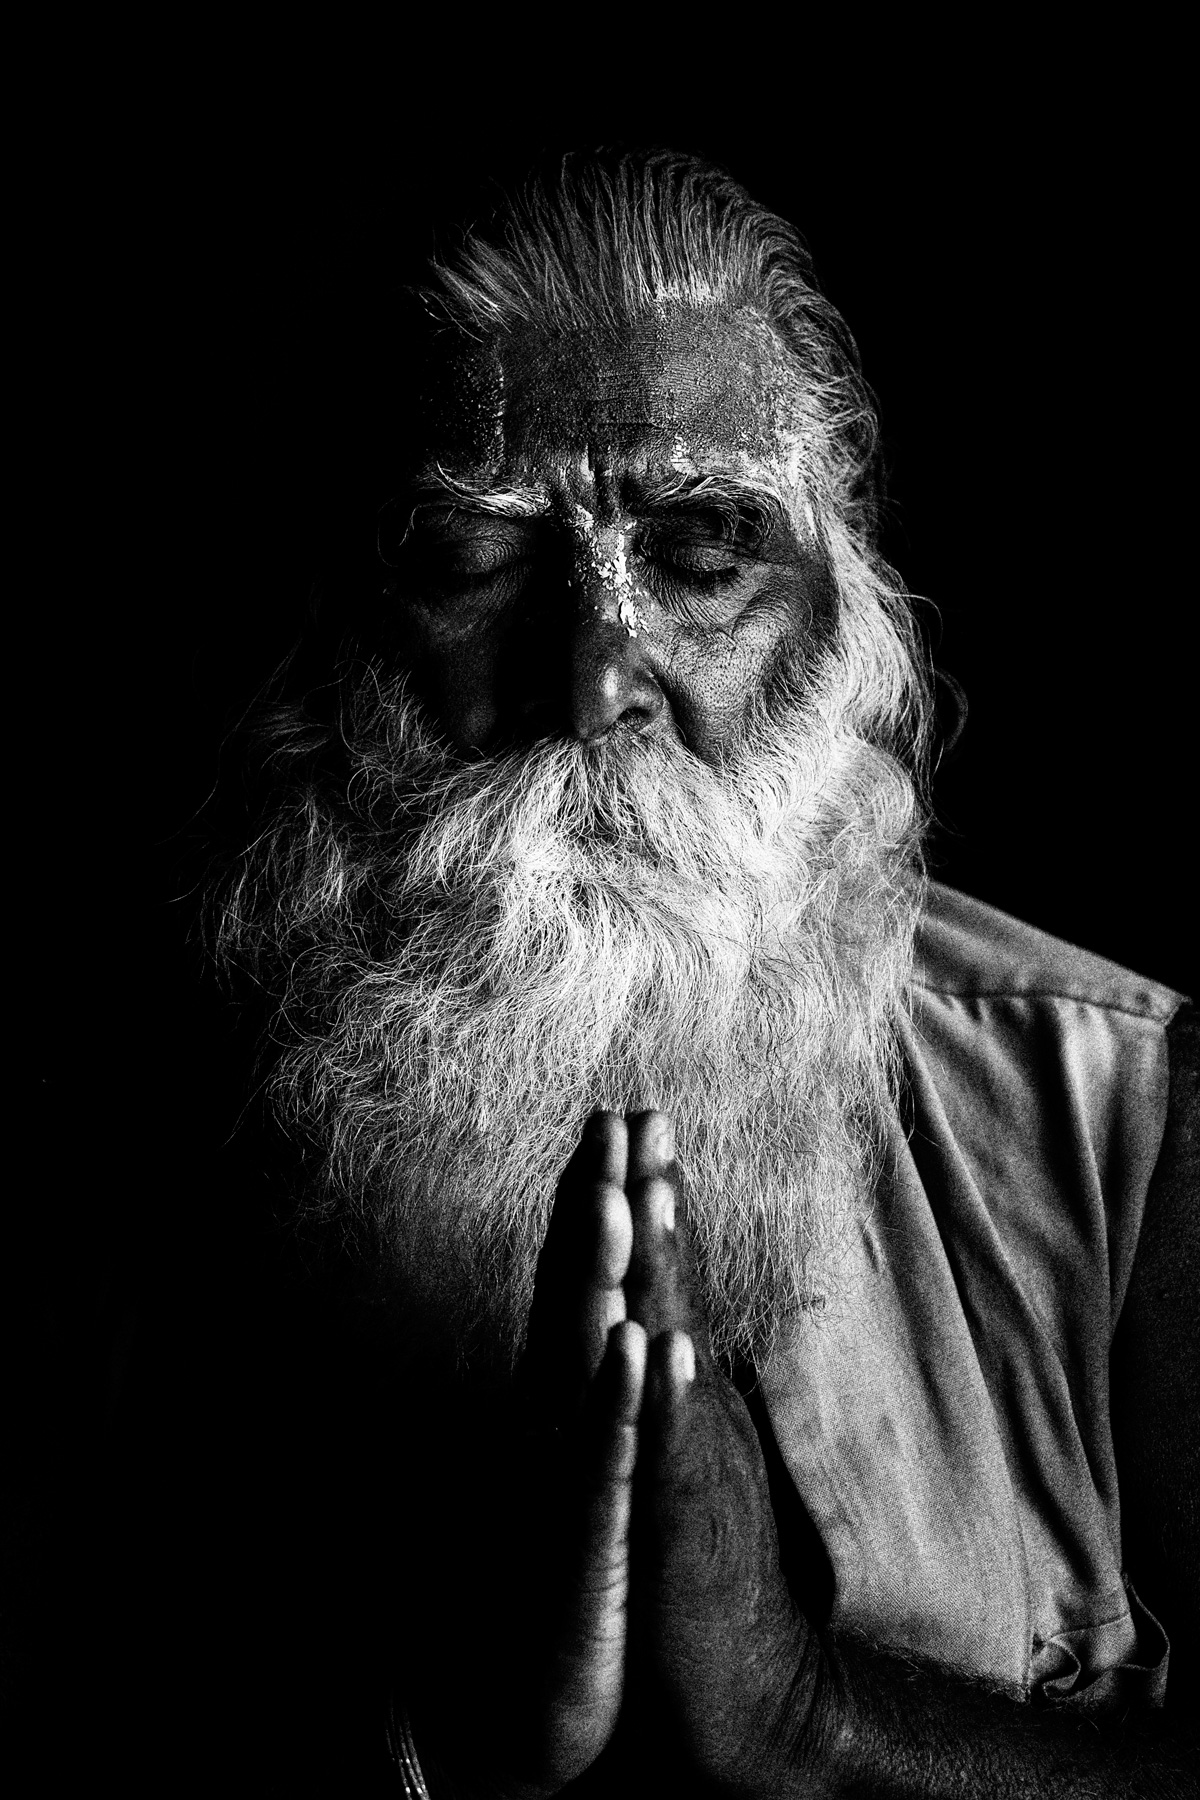 Eyes Closed Portrait of a Nepalese Sadhu: Black and White Portrait Photography by Jean Tran and Élysée Lang